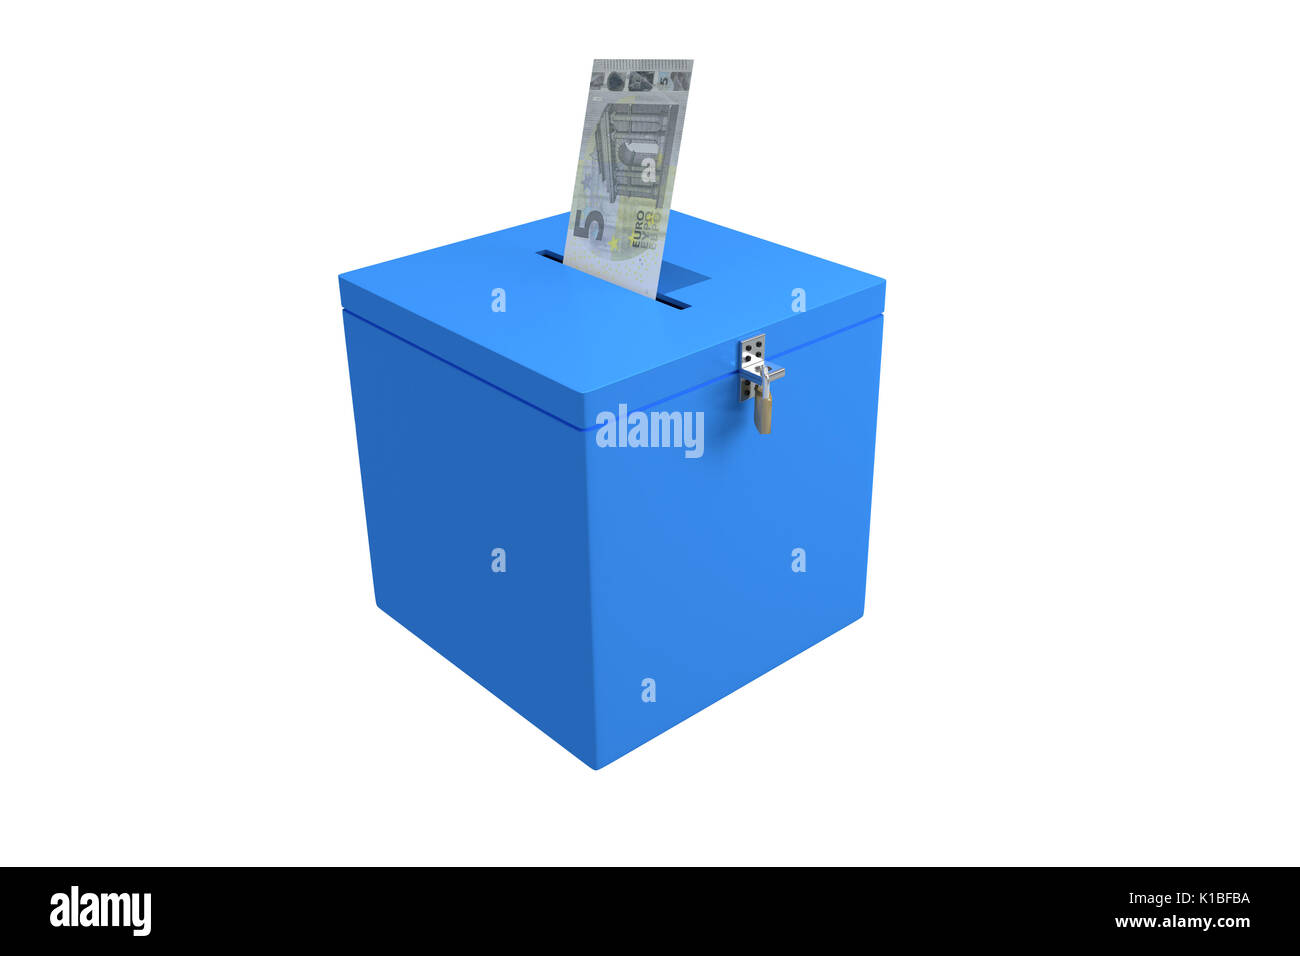 Render illustration of a money bill been inserted into a symbolic election ballot box, isolated on white. Stock Photo